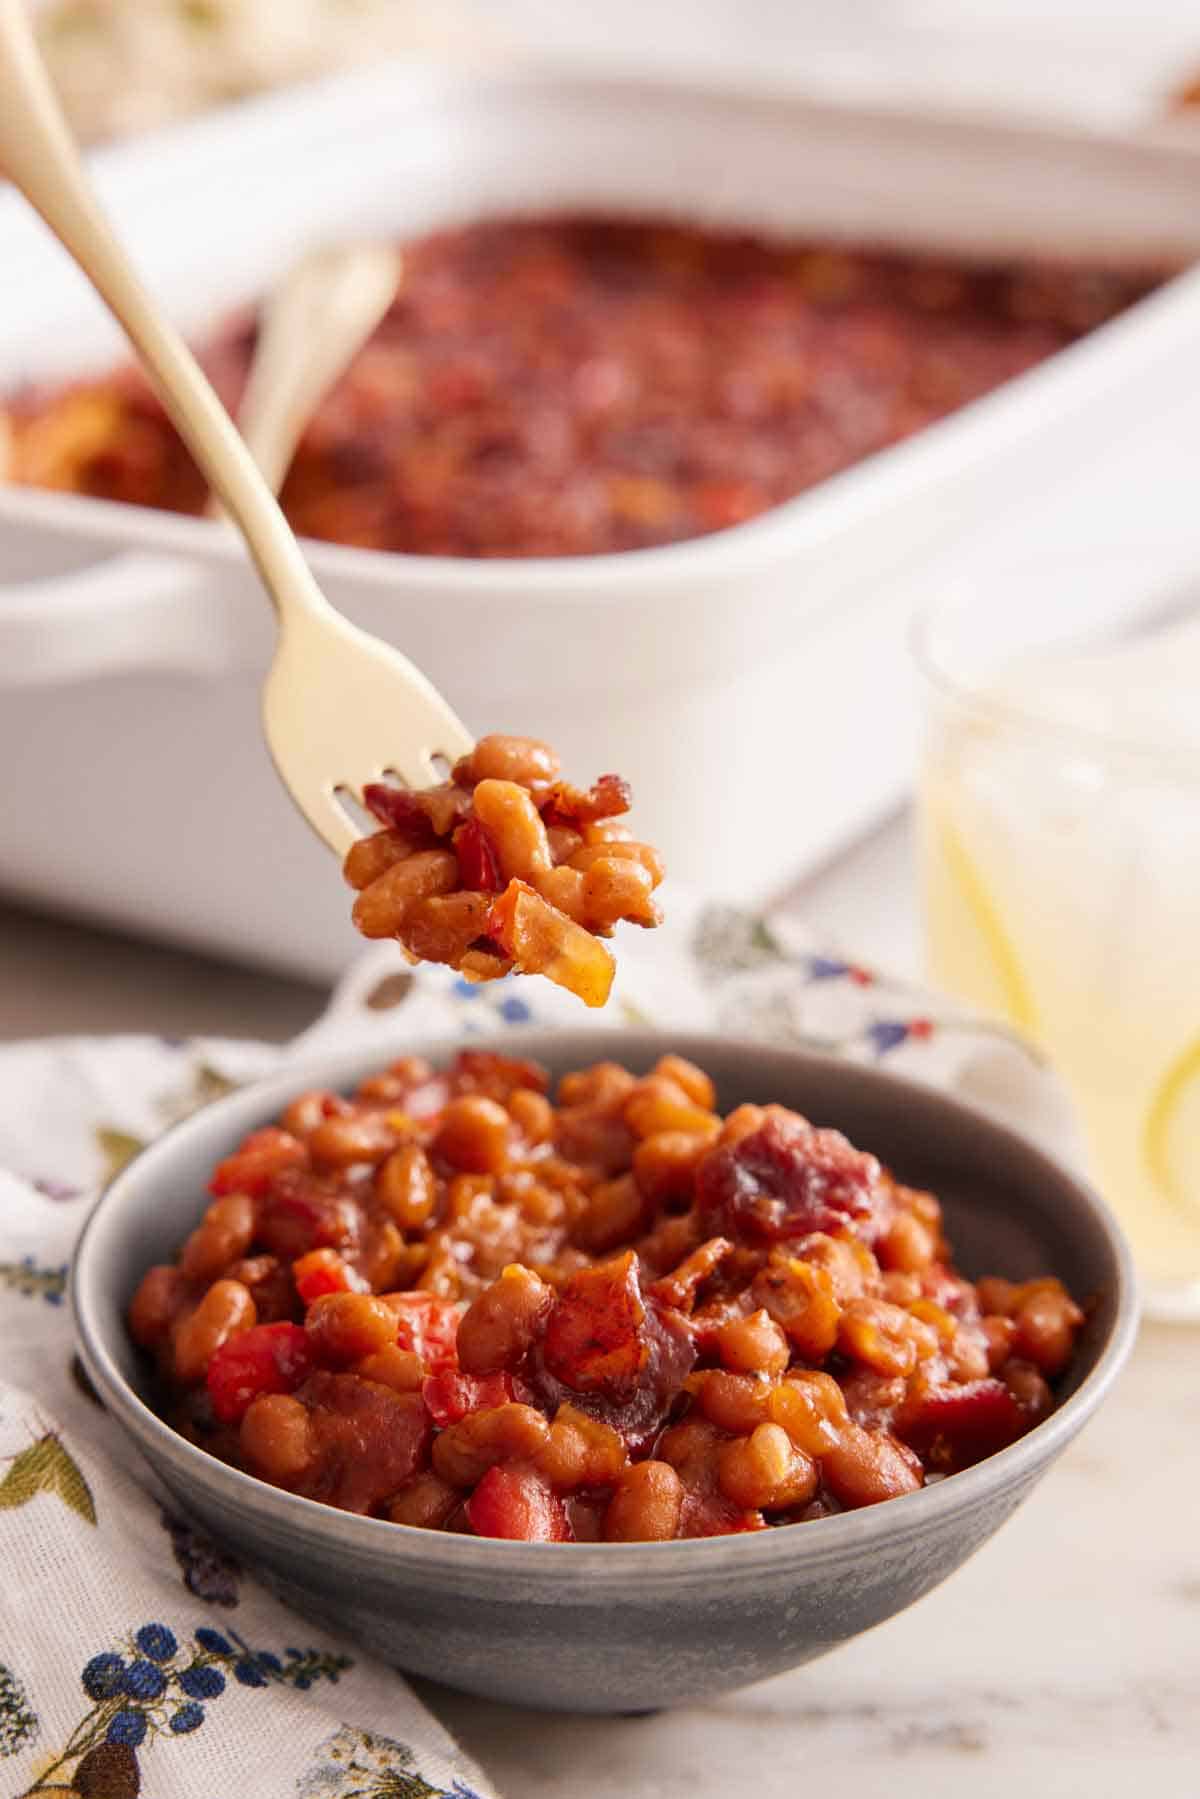 A forkful of baked beans lifted from a bowl with a baking dish in the background.